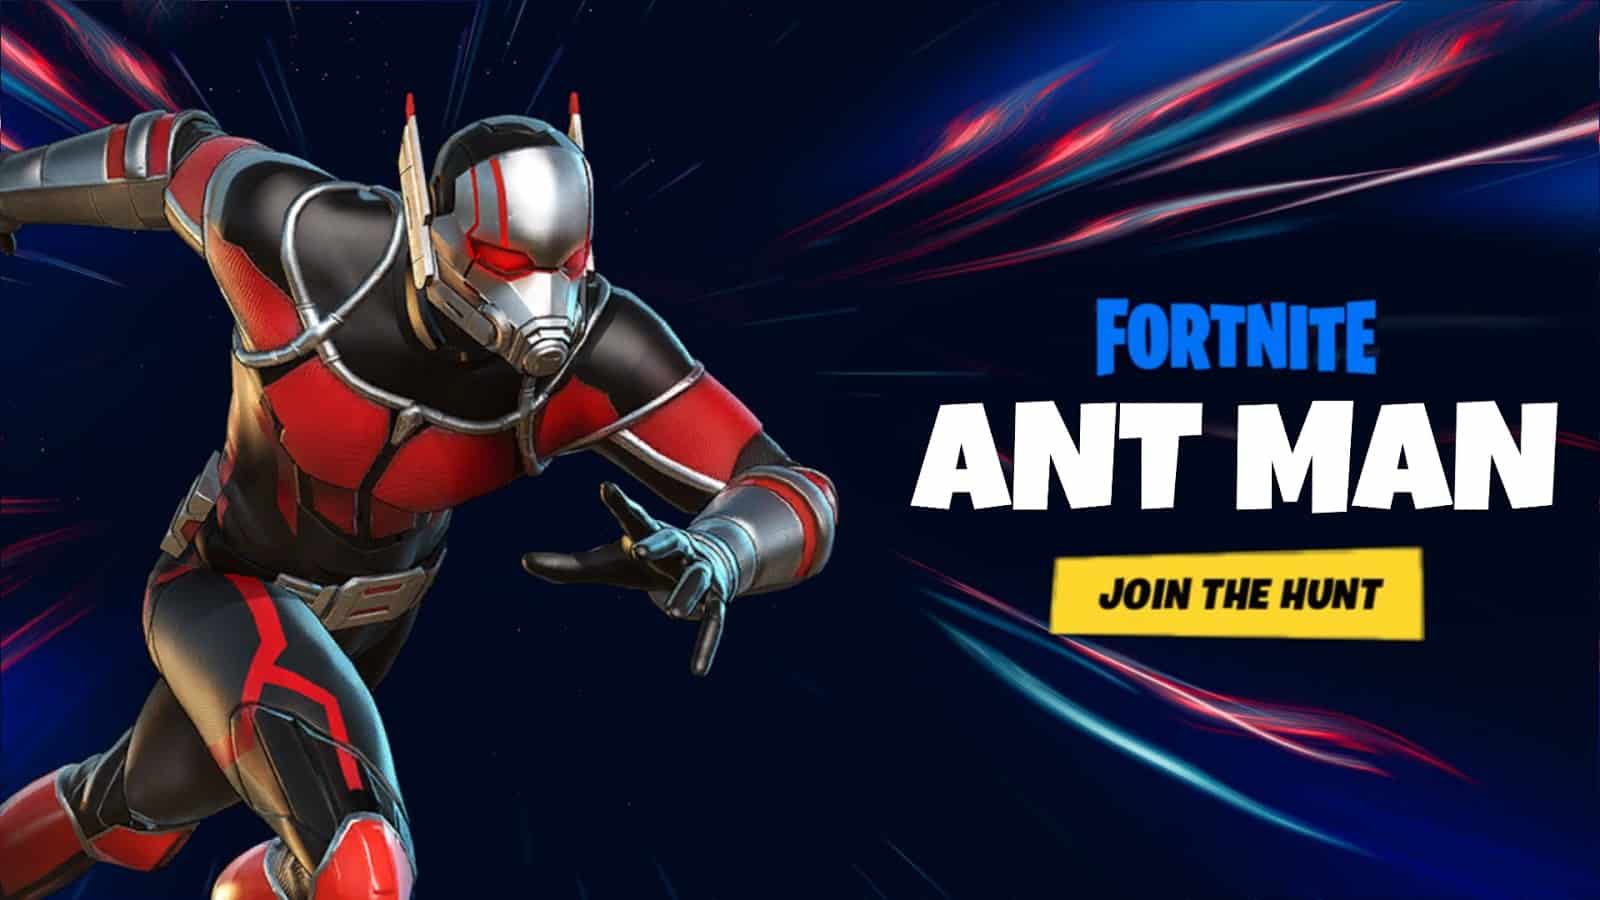 Fortnite: Leaks Confirm Ant Man As Next Cross Over